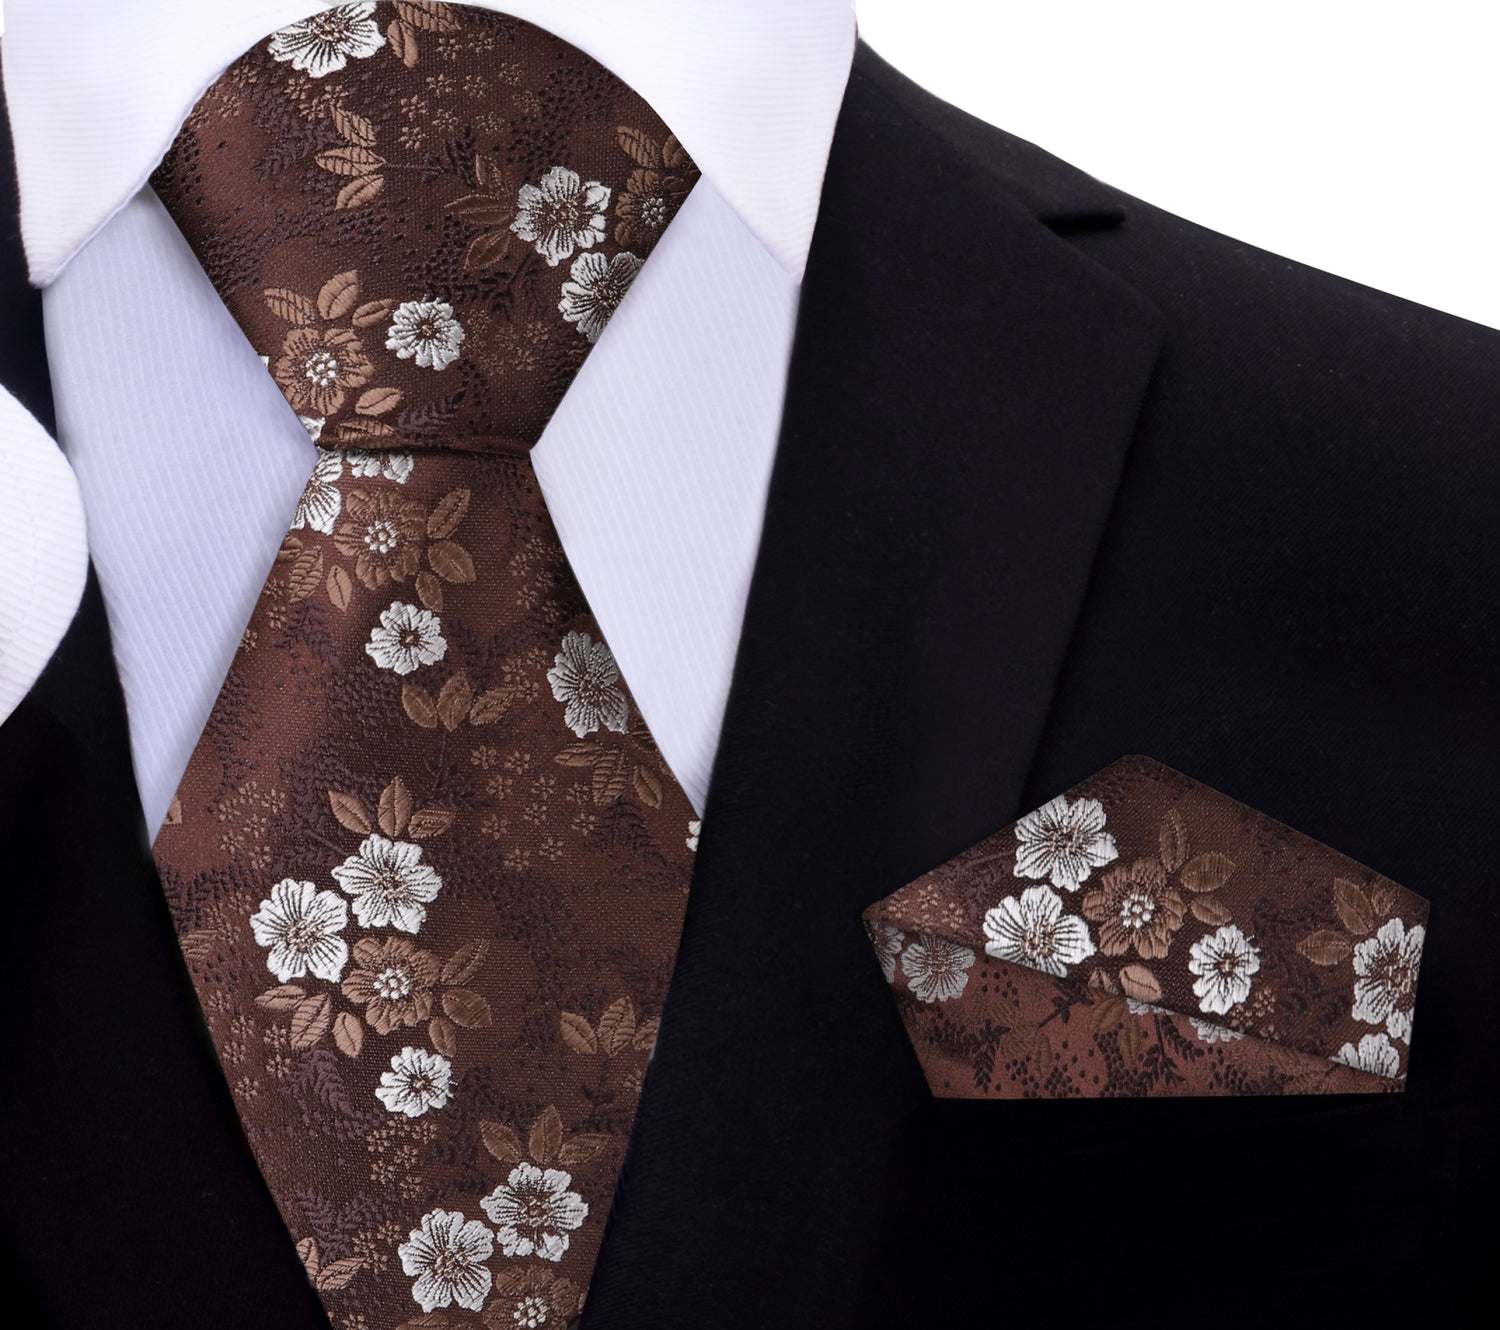 Shades of Brown Floral Tie and Matching Square